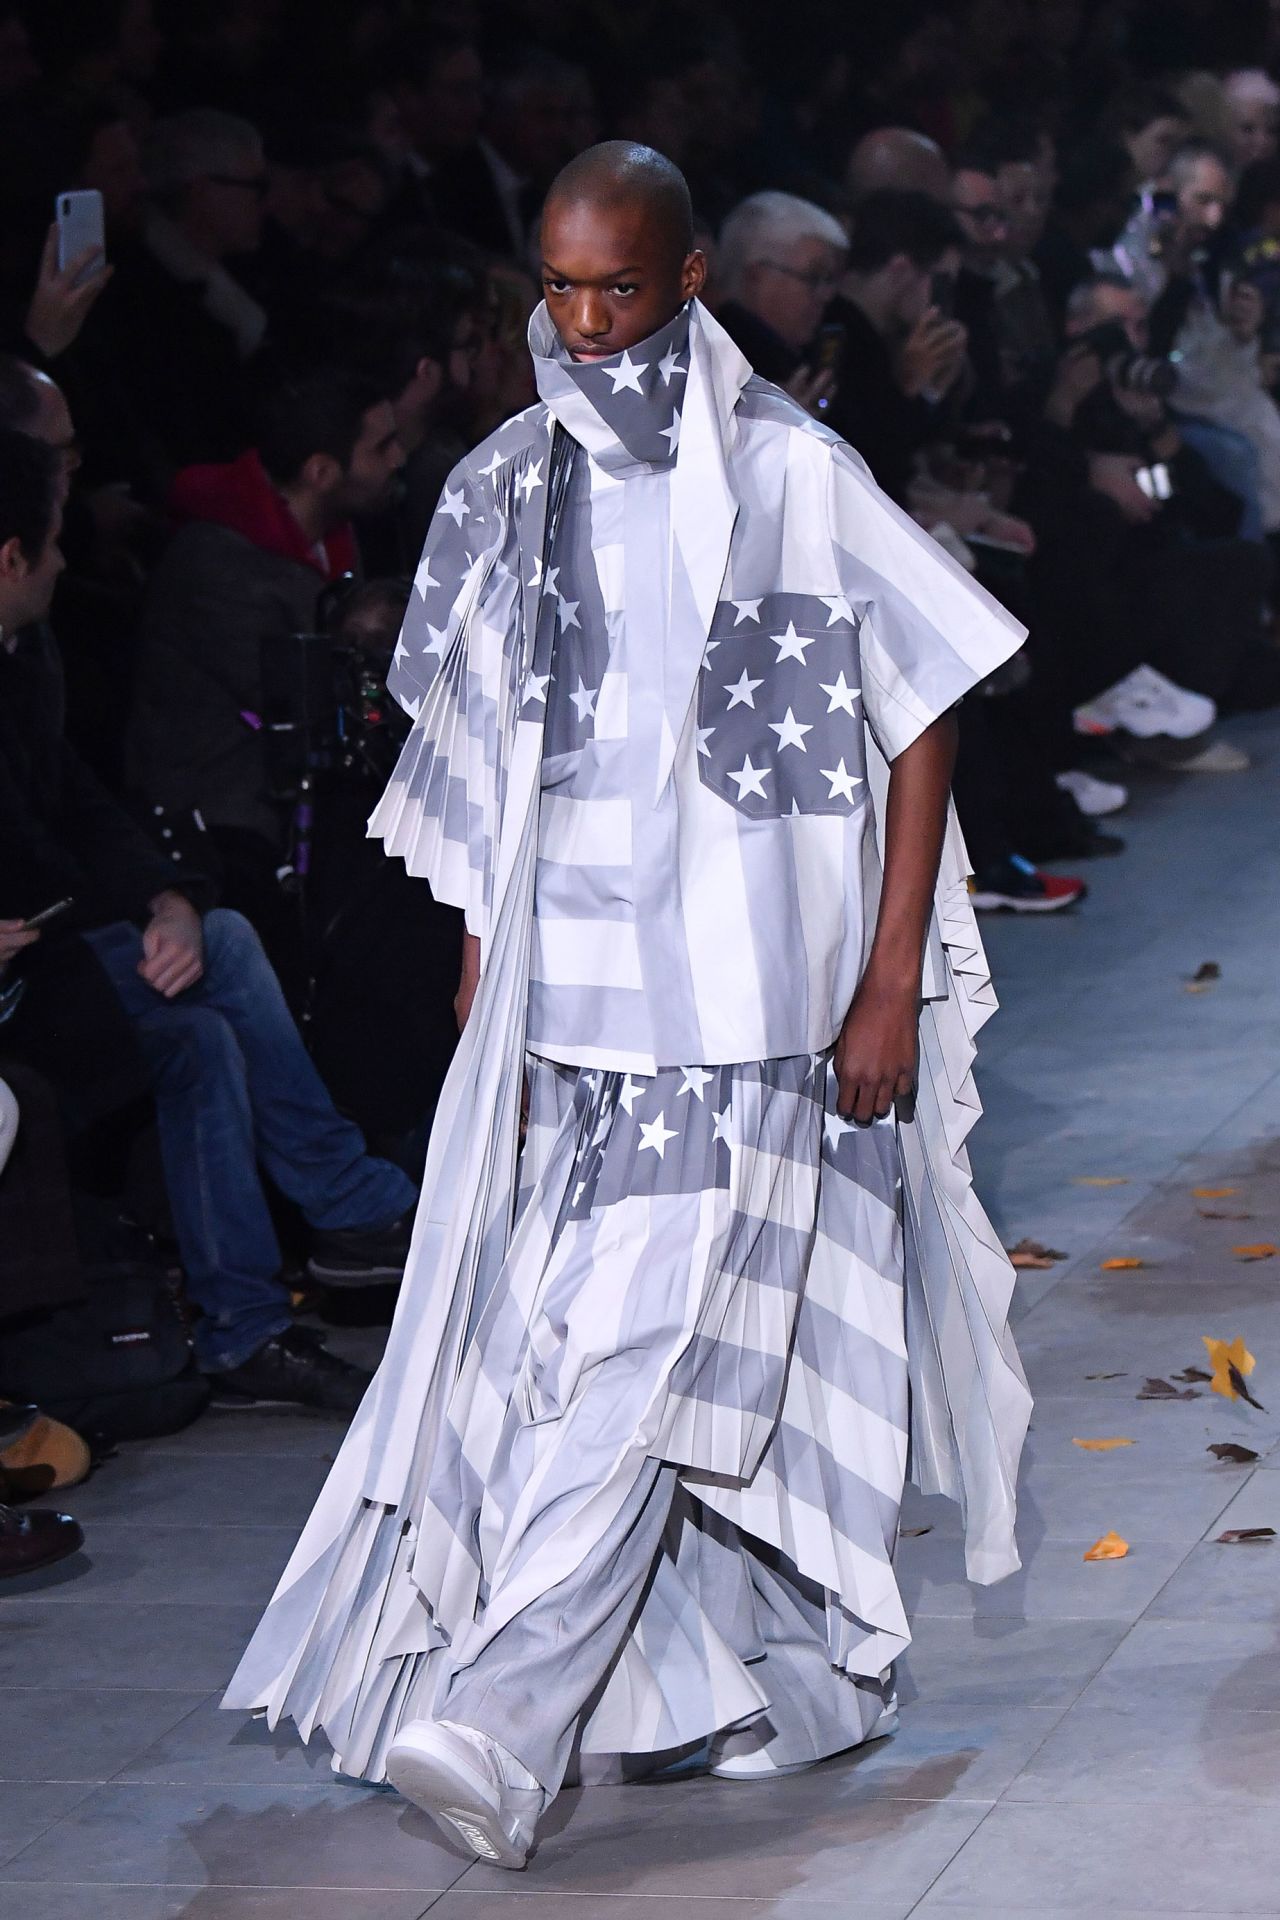 Throughout his career, the Ghanaian-American designer reinterpreted the American flag in Louis Vuitton collections and through art. The motif appeared frequently in his 2019 Fall-Winter Menswear collection for LV, which was inspired heavily by Michael Jackson, with this desaturated pleated outfit holding court as one of its best pieces. He and Japanese artist Takashi Murakami also reintepreted the flag in a collaborative artwork in 2018 for the Gagosian and the flag also appeared as early as 2013 in his works, with A$AP Rocky draped in it for his black and white album cover for "Long.Live.A$AP" created by Abloh.